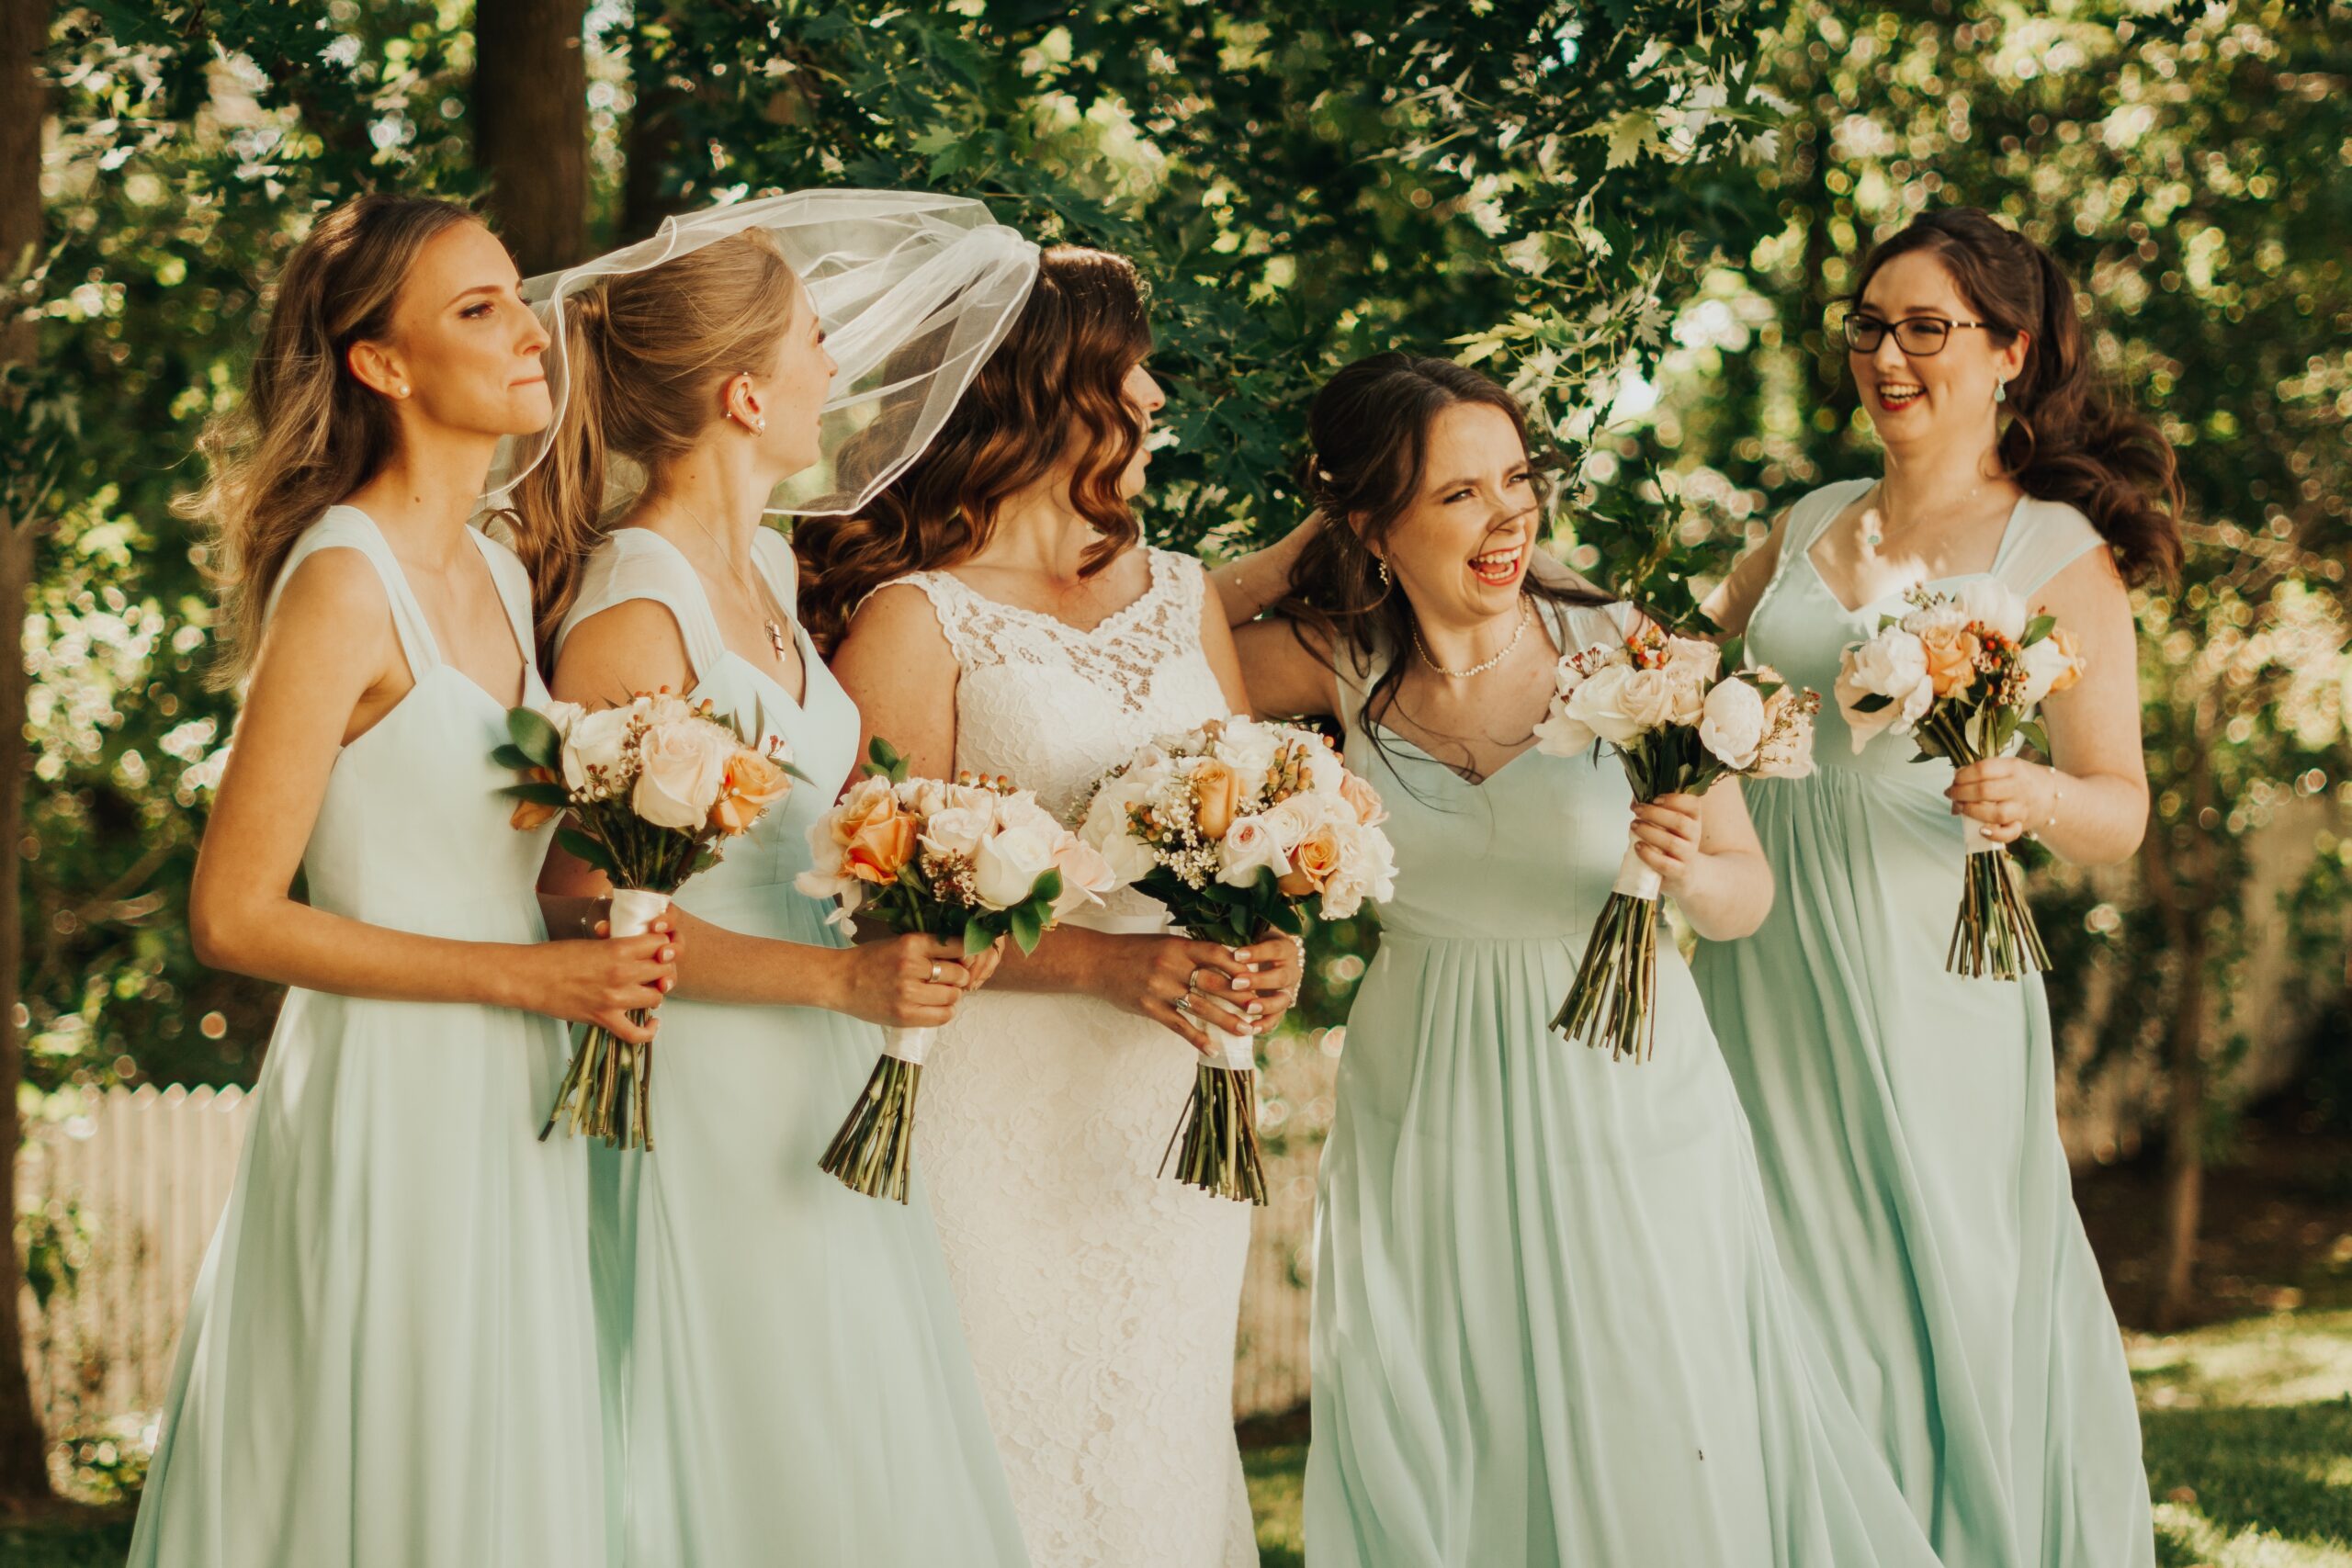 A New Year's Eve Wedding  Bridesmaid dress color schemes, New